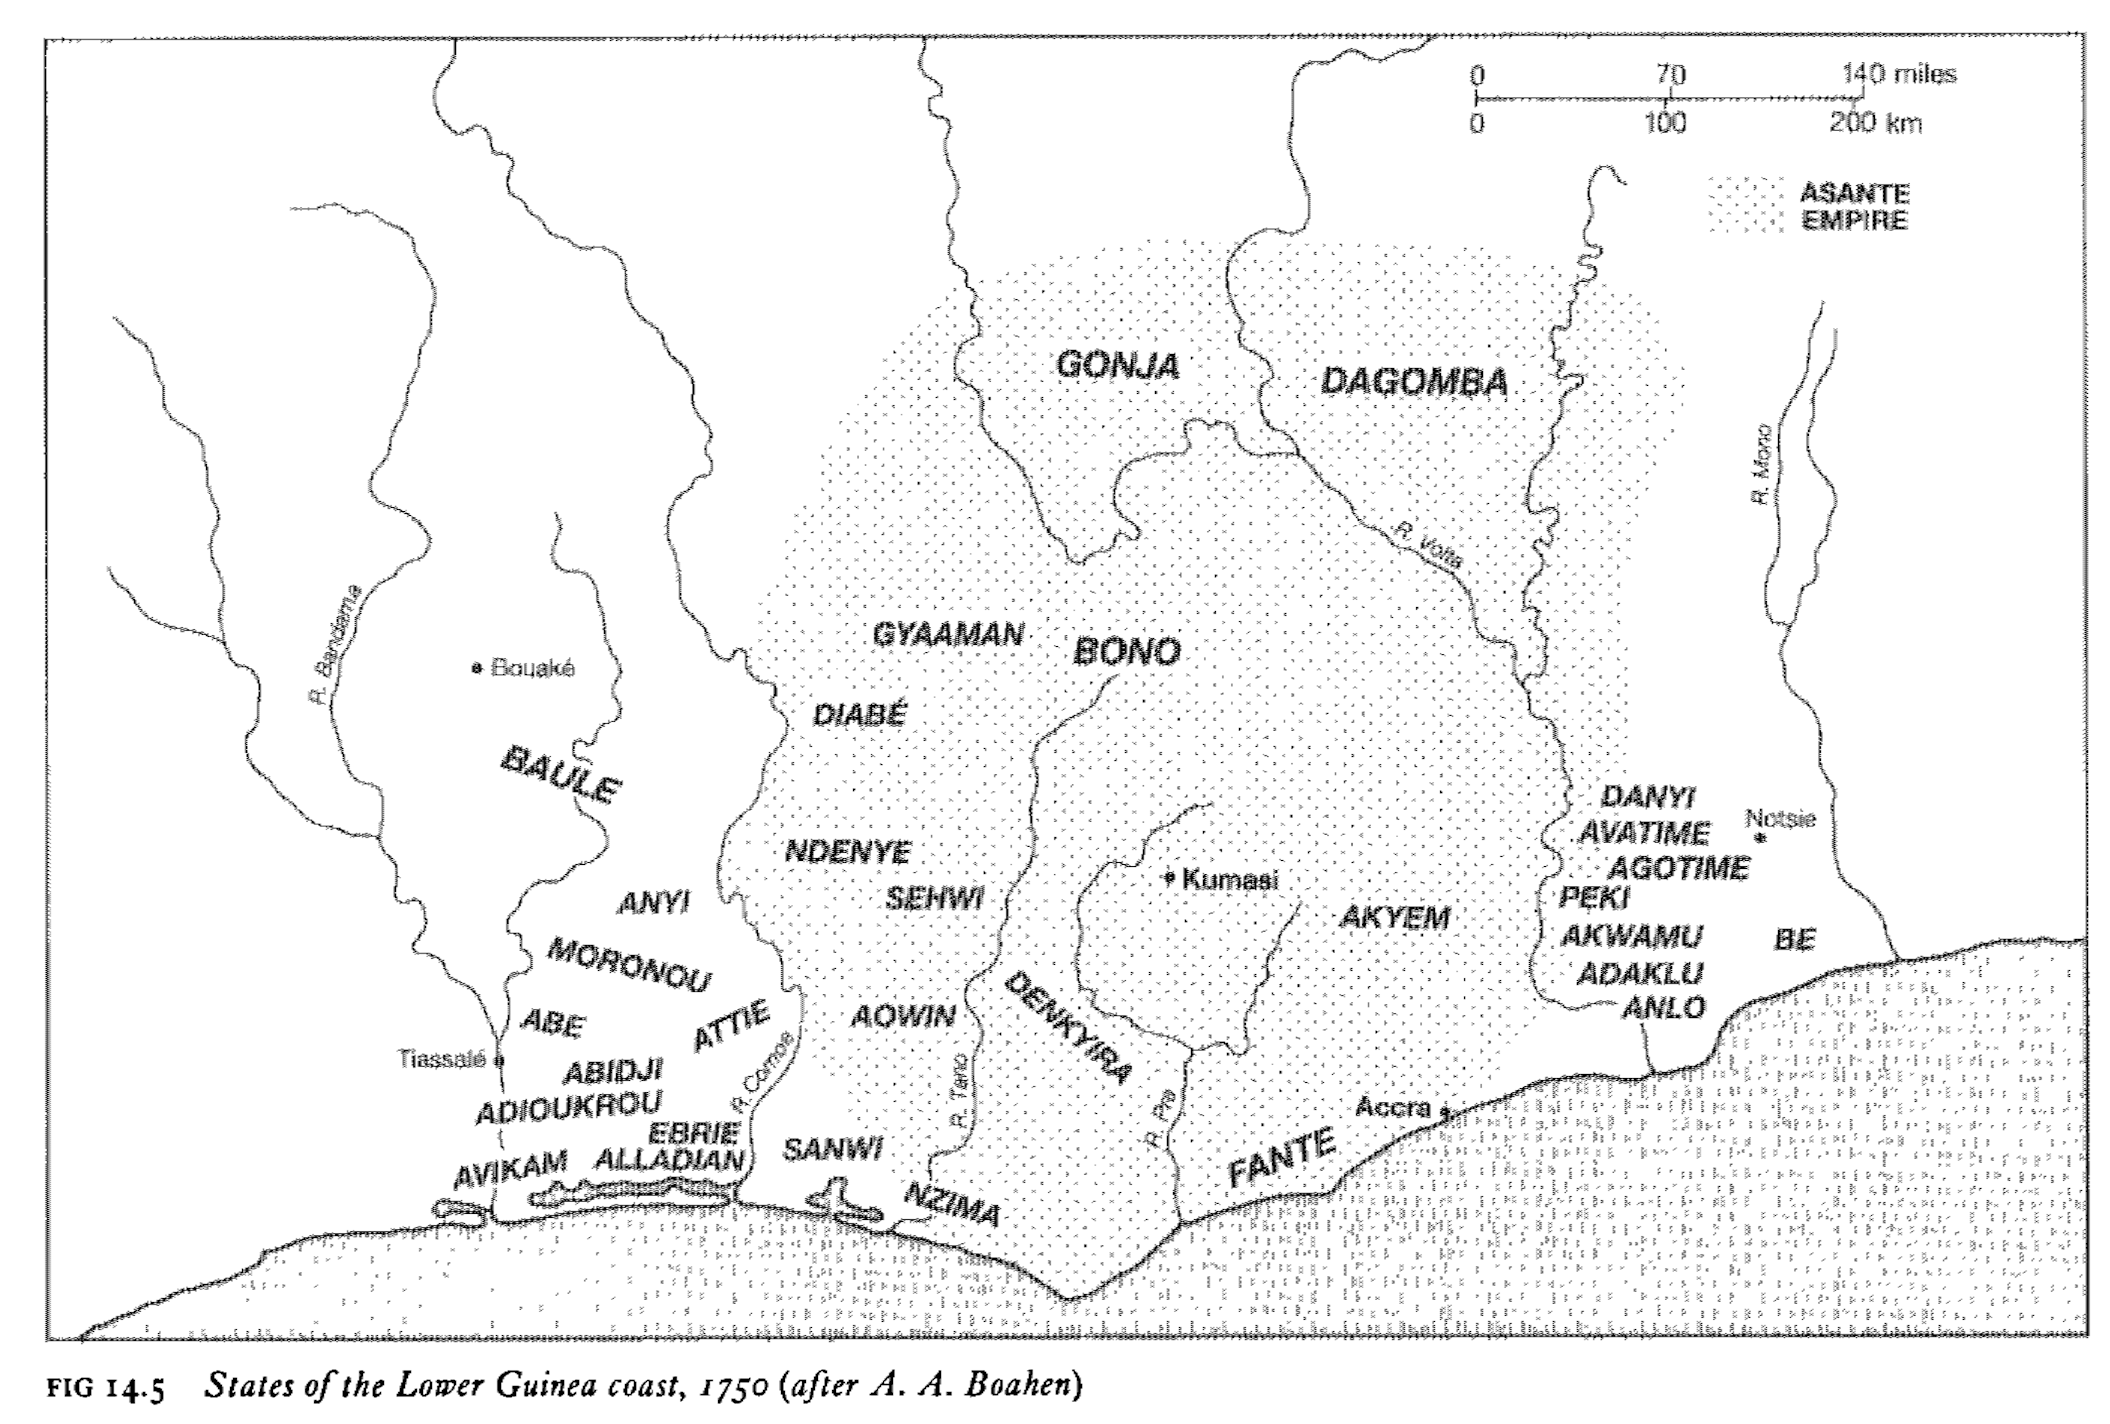 States of the Lower Guinea coast, 1750.png